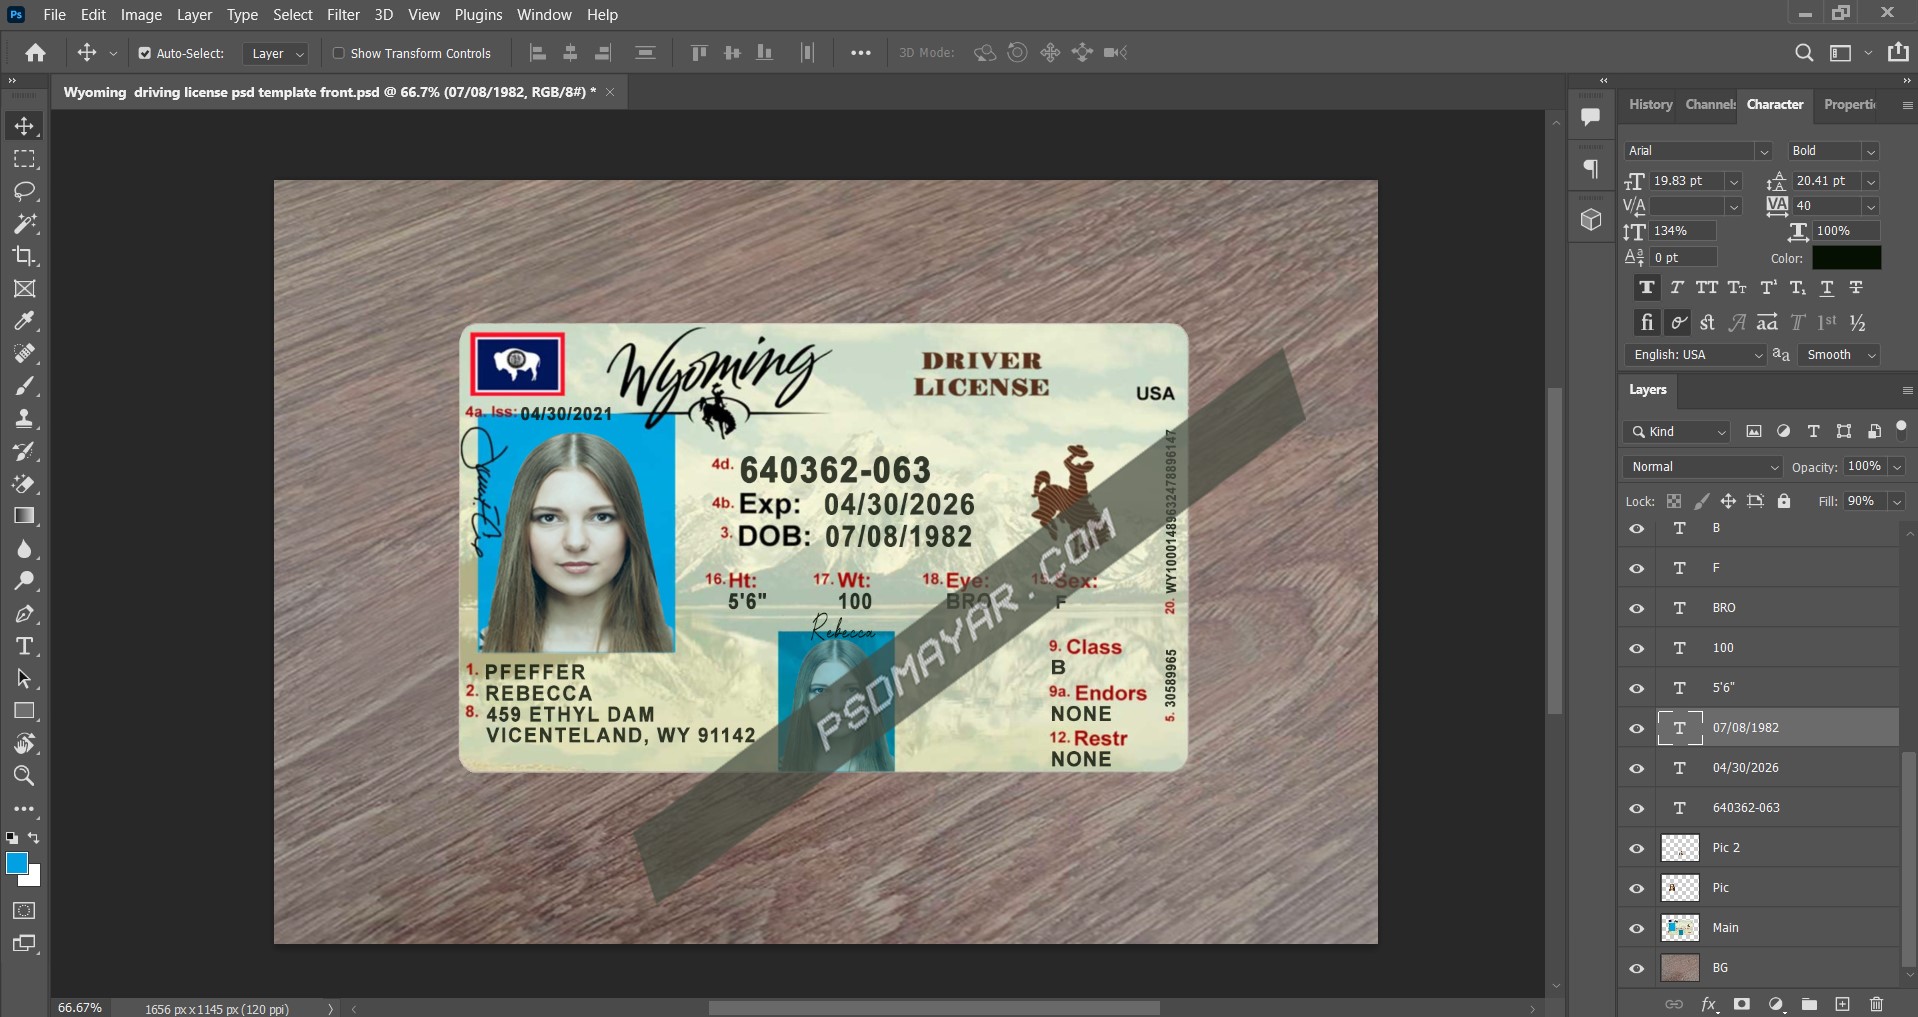 USA Wyoming state driving license template in PSD format